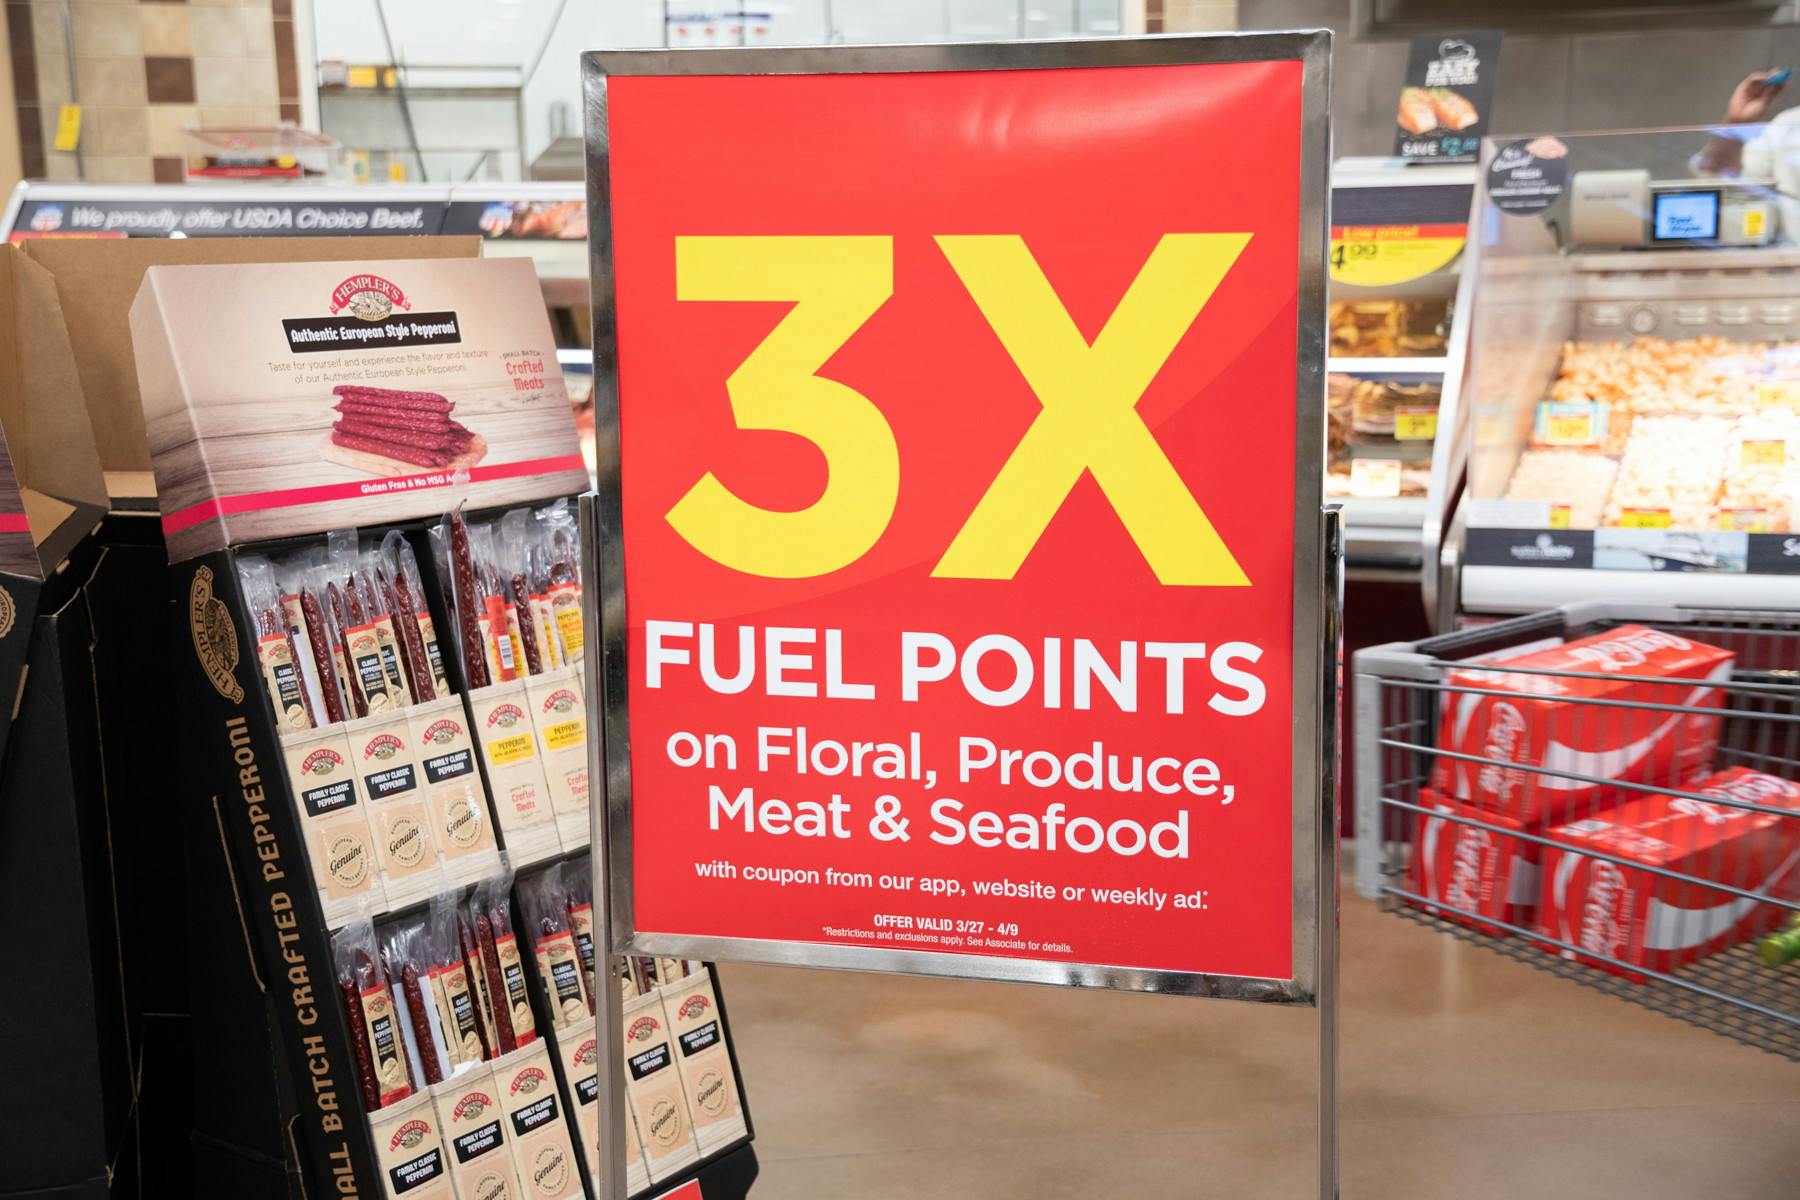 A sign inside Kroger advertising 3x fuel points on Floral, Produce, or Meat & Seafood.